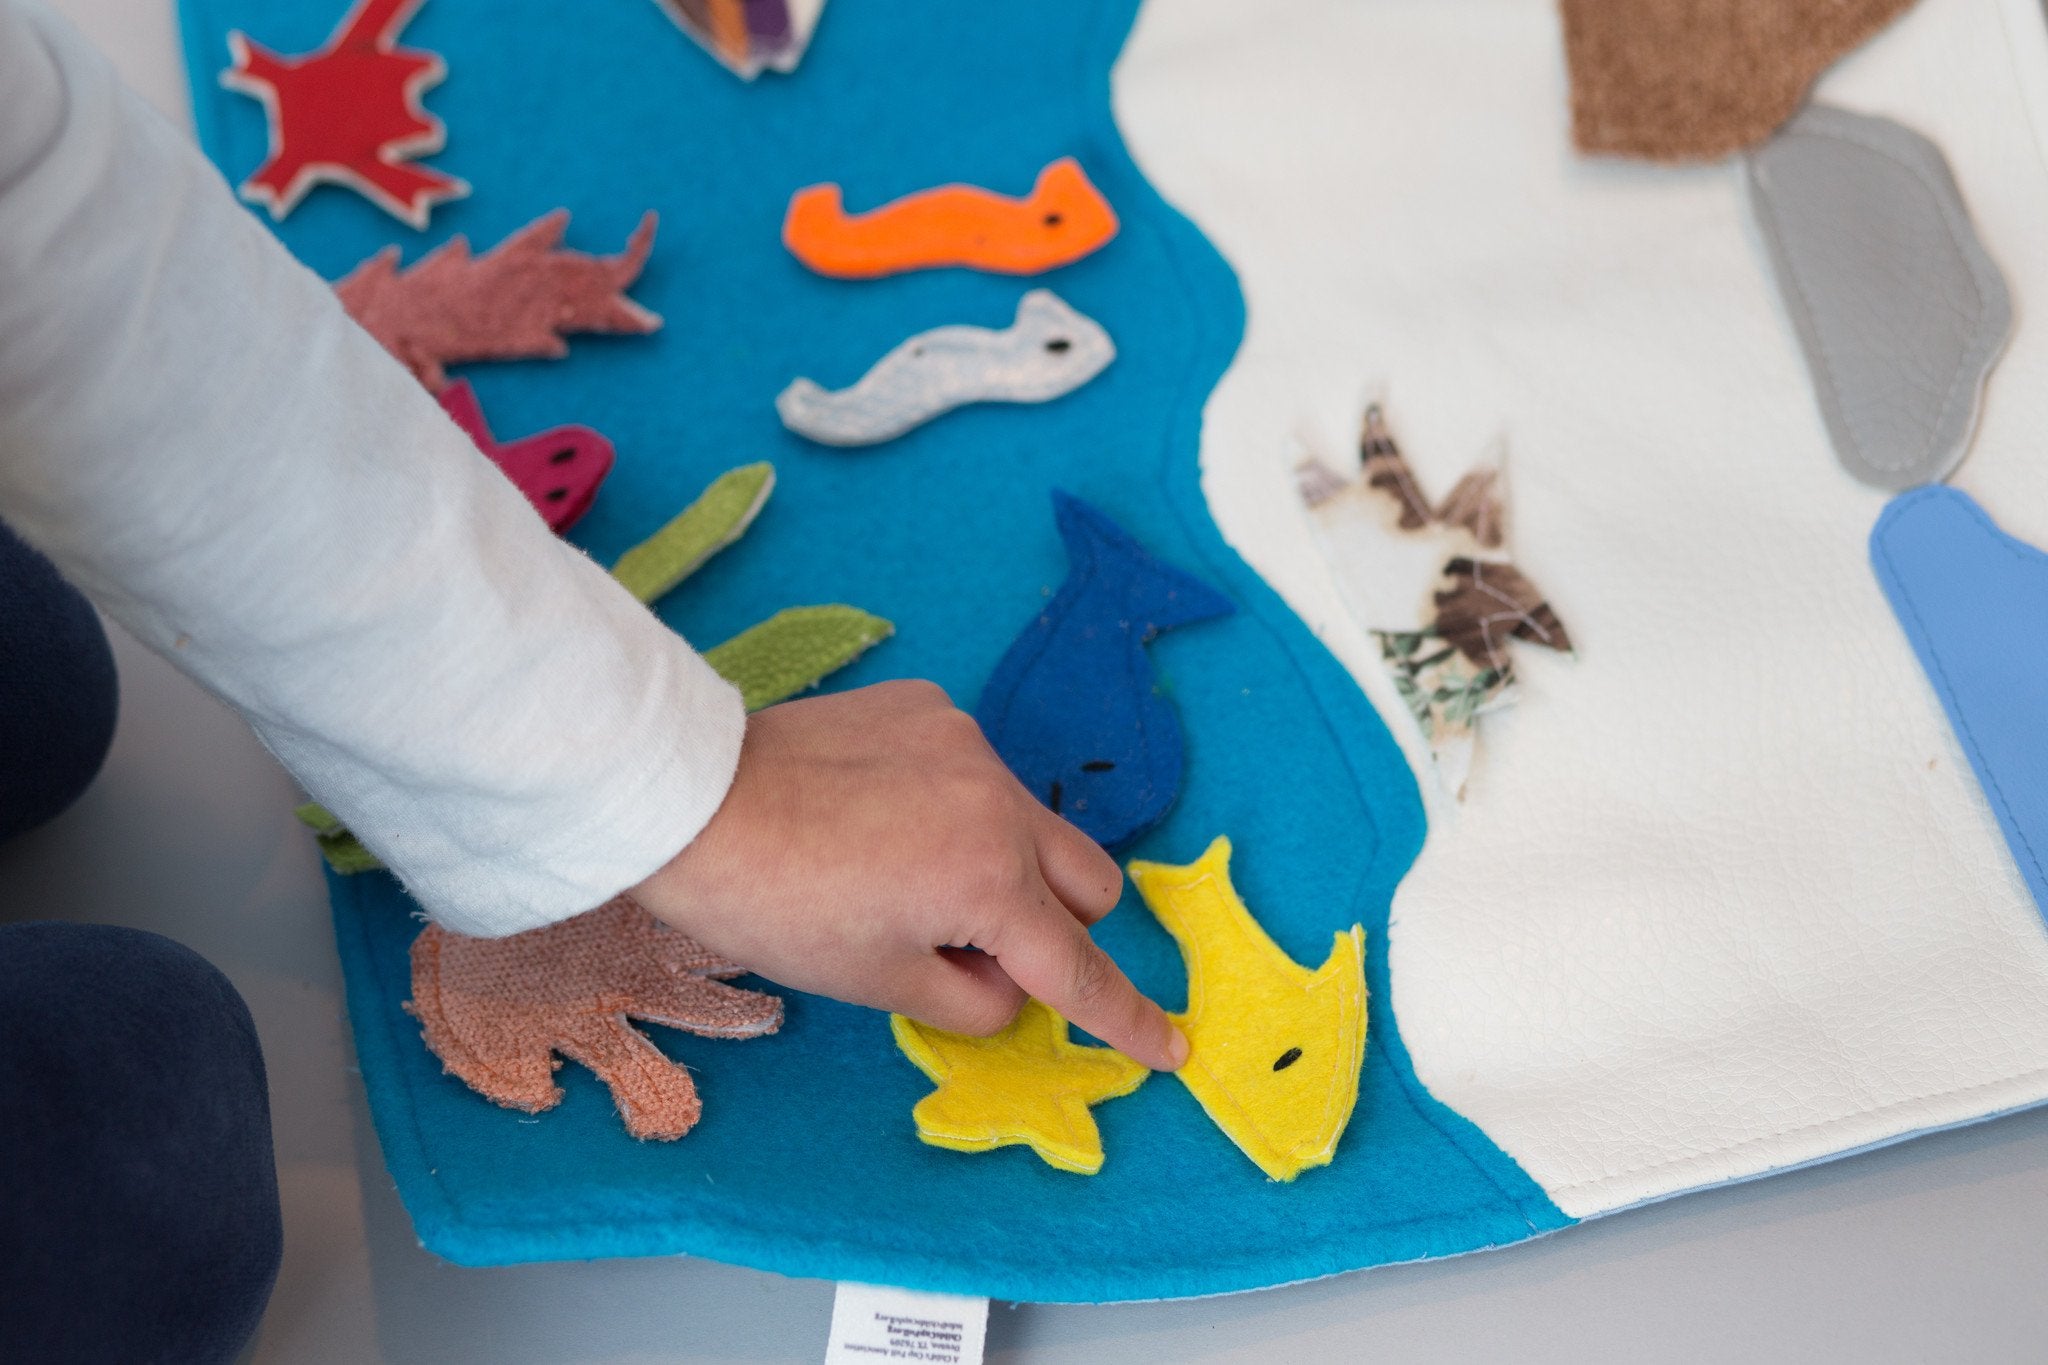 Dive deeper into educational playtime with the Sea Habitat Storyboard! This toy has everything to please your little marine biologist. This includes various sea creature, habitat, and nature pieces. Increase your child’s creativity and imaginative play with this set.